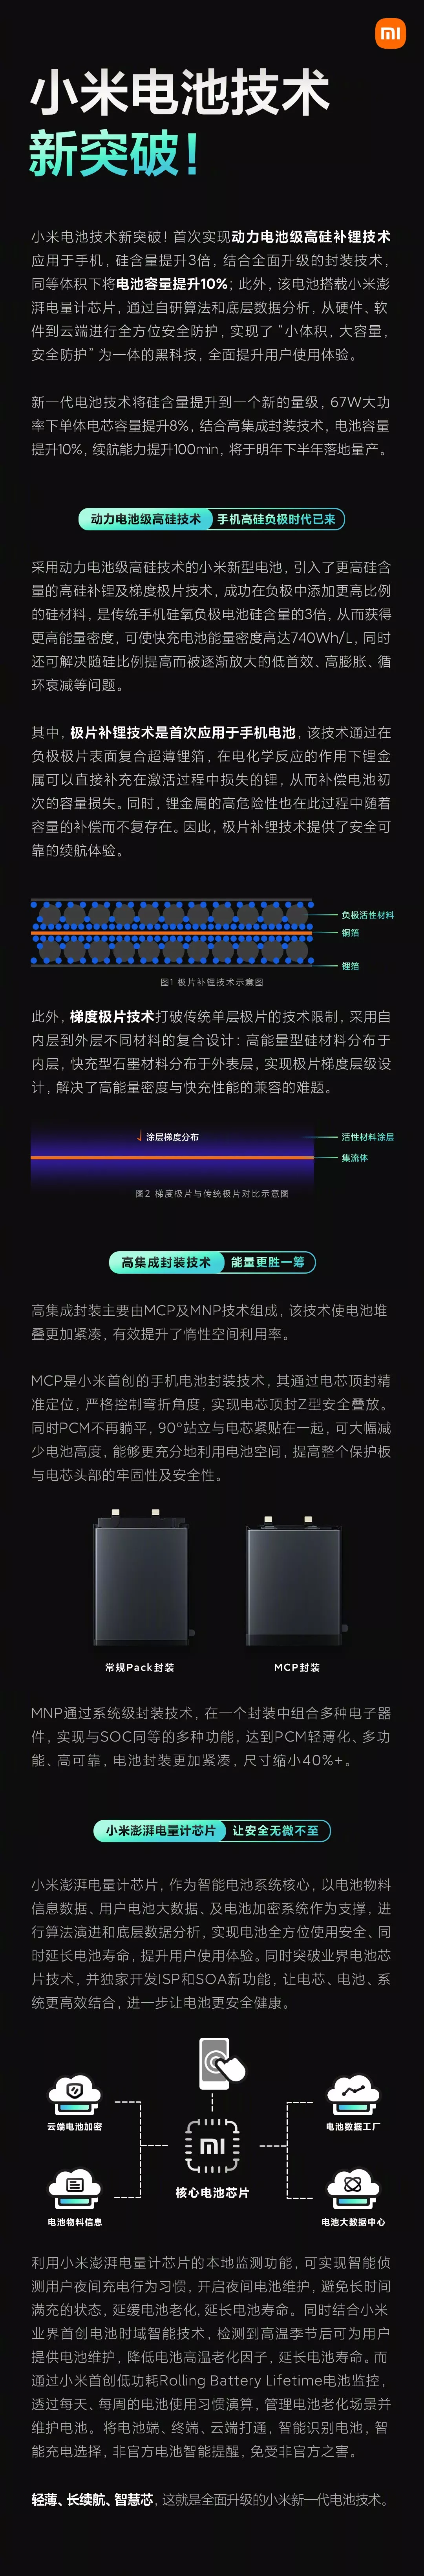 Xiaomi mobile phone battery technology：Battery life increased by 100 minutes